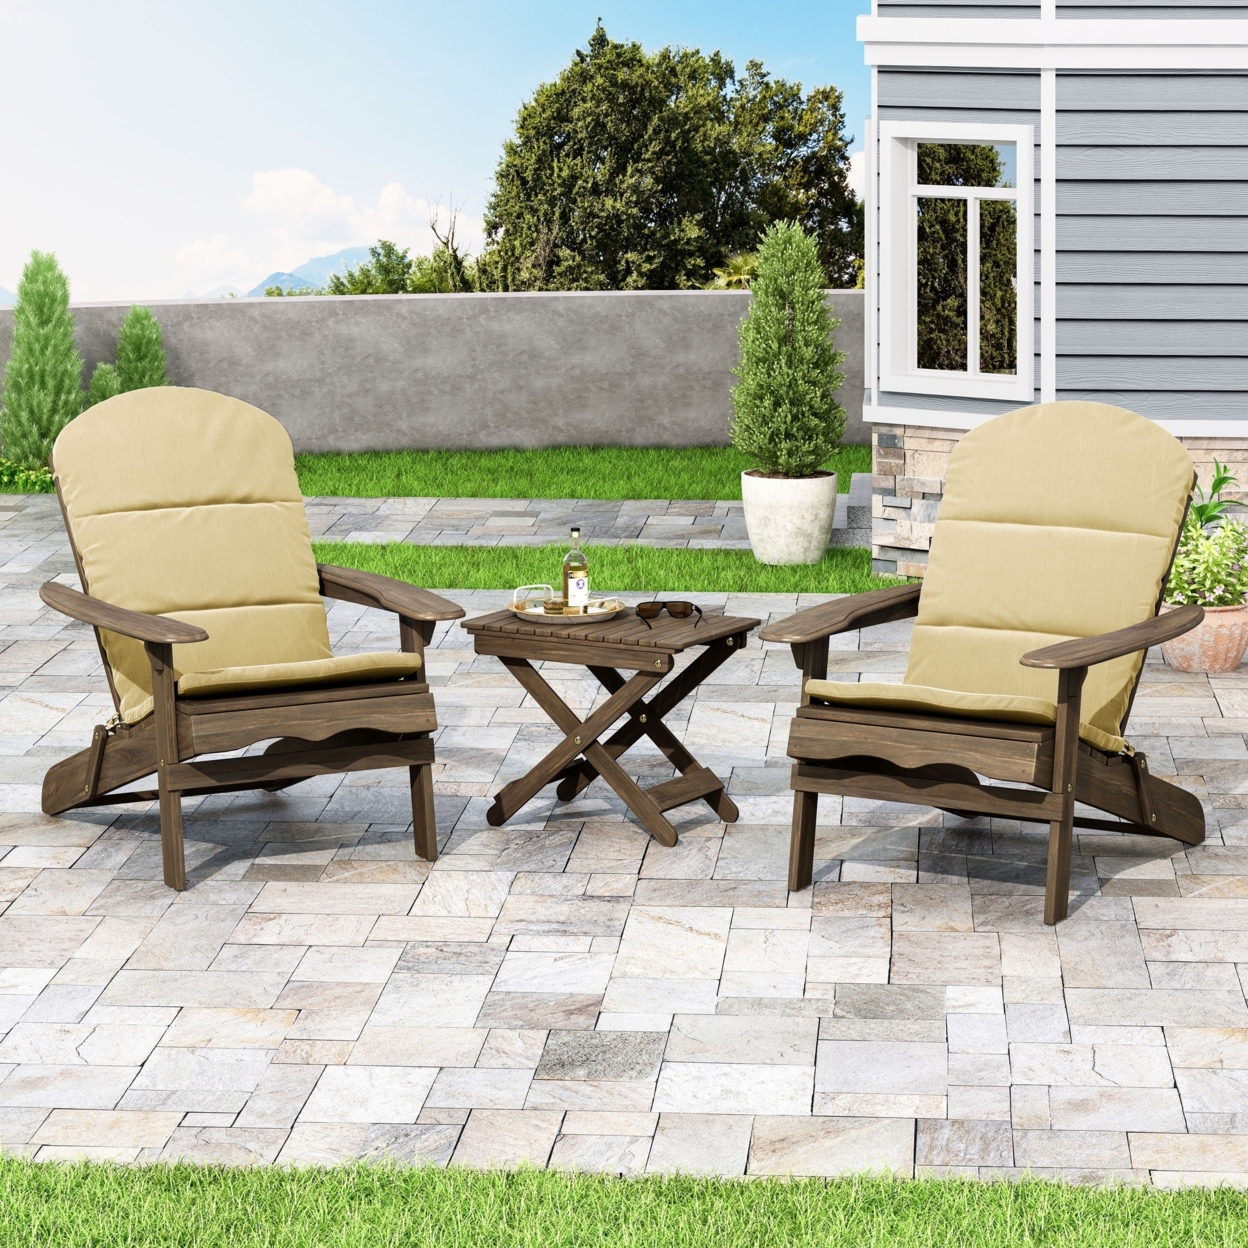 Reed Outdoor 2 Seater Acacia Wood Chat Set With Water Resistant Cushions - Gray/khaki